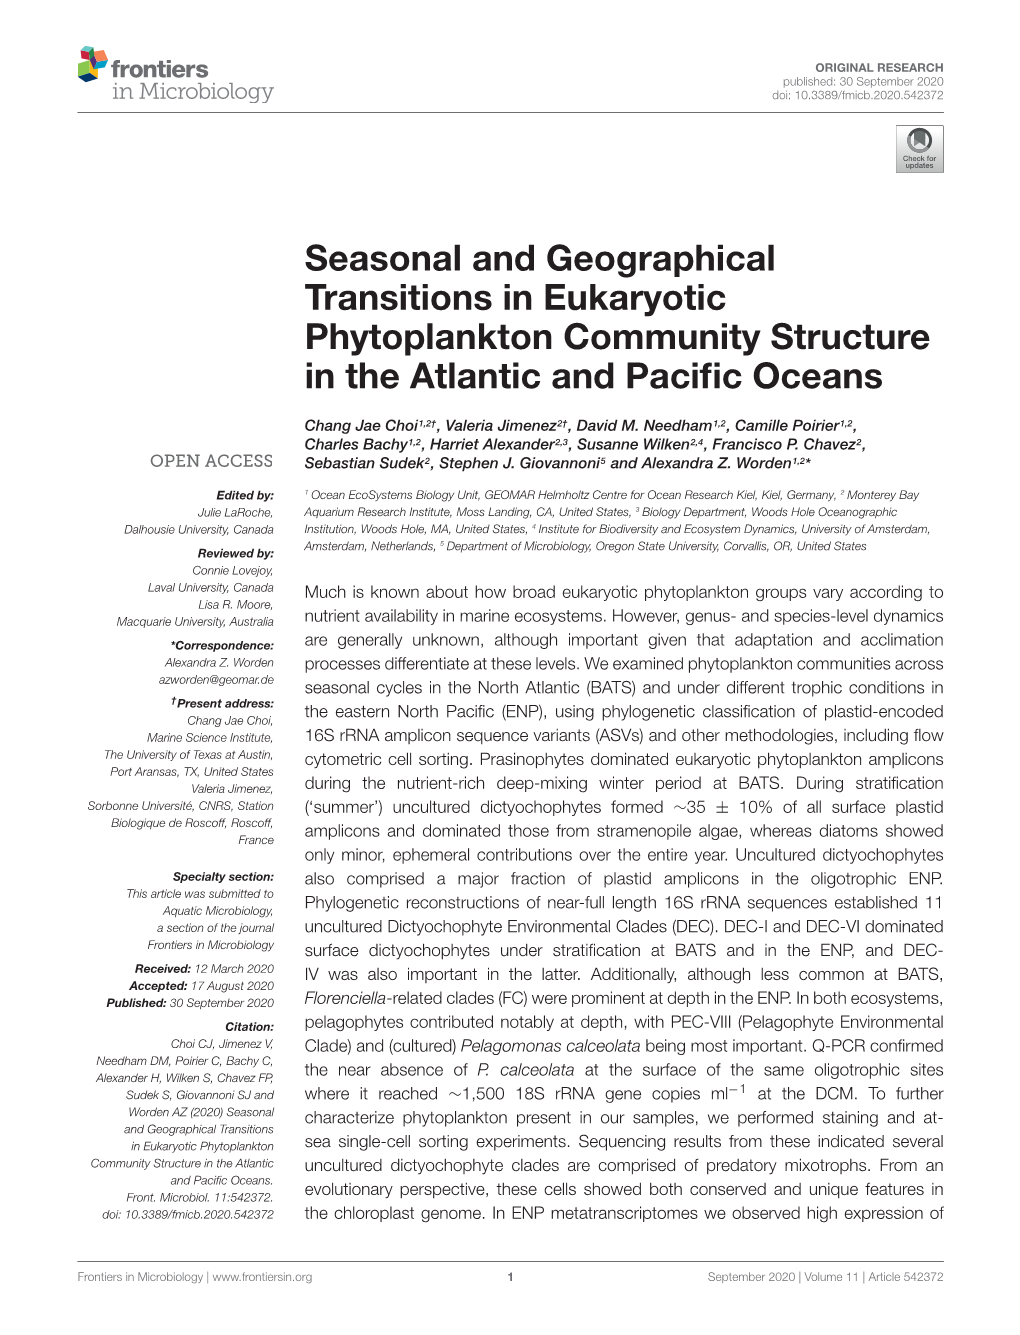 Seasonal and Geographical Transitions in Eukaryotic Phytoplankton Community Structure in the Atlantic and Paciﬁc Oceans